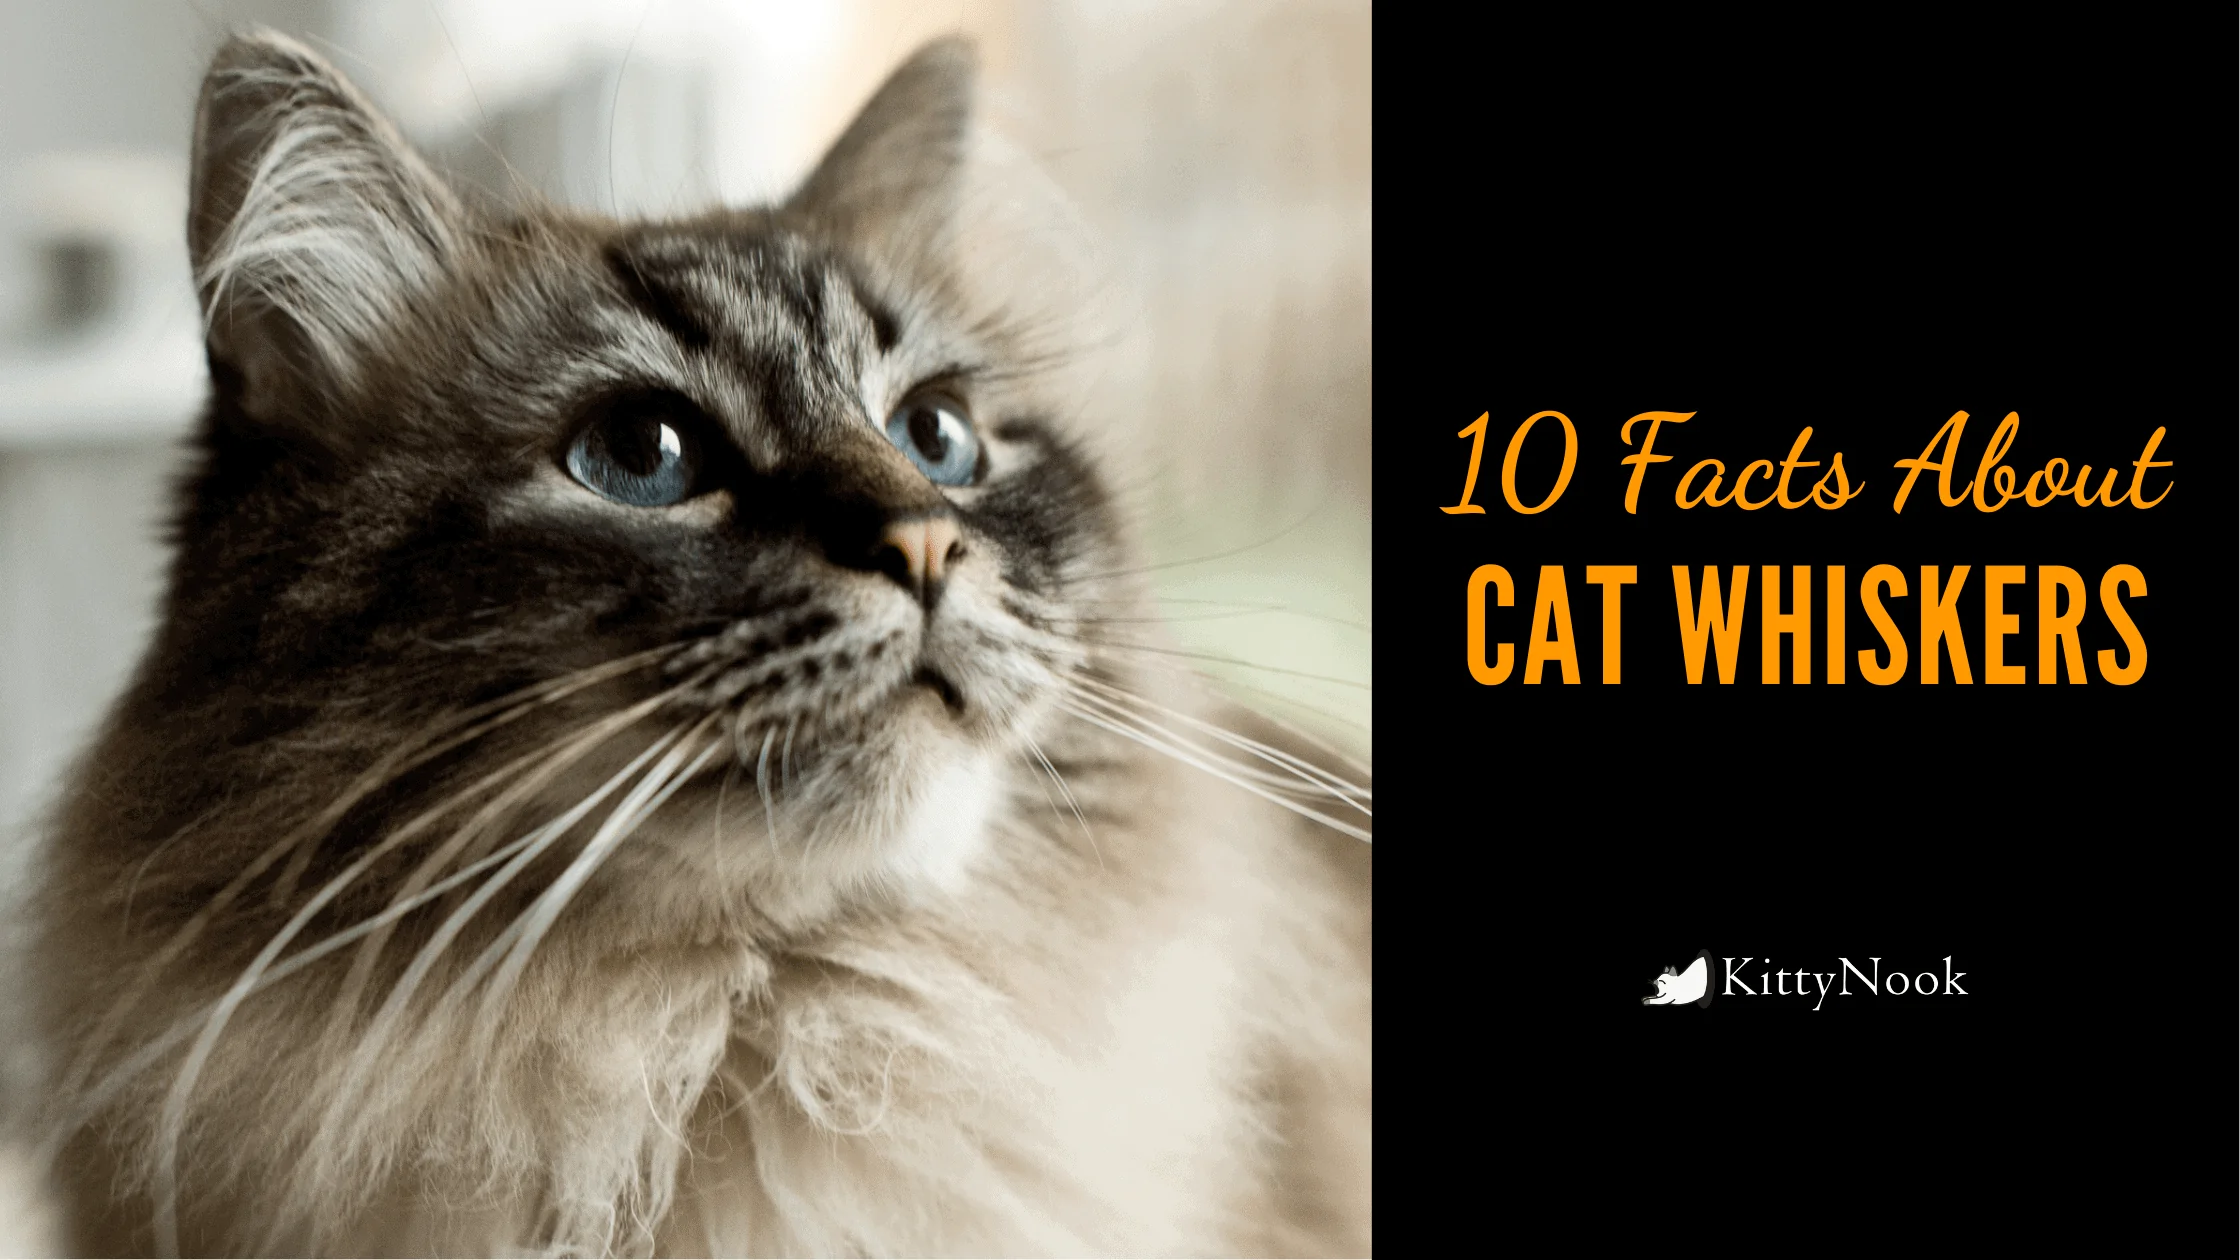 Why Are Cats' Whiskers Important? 10 Facts About Cat Whiskers - KittyNook Cat Company